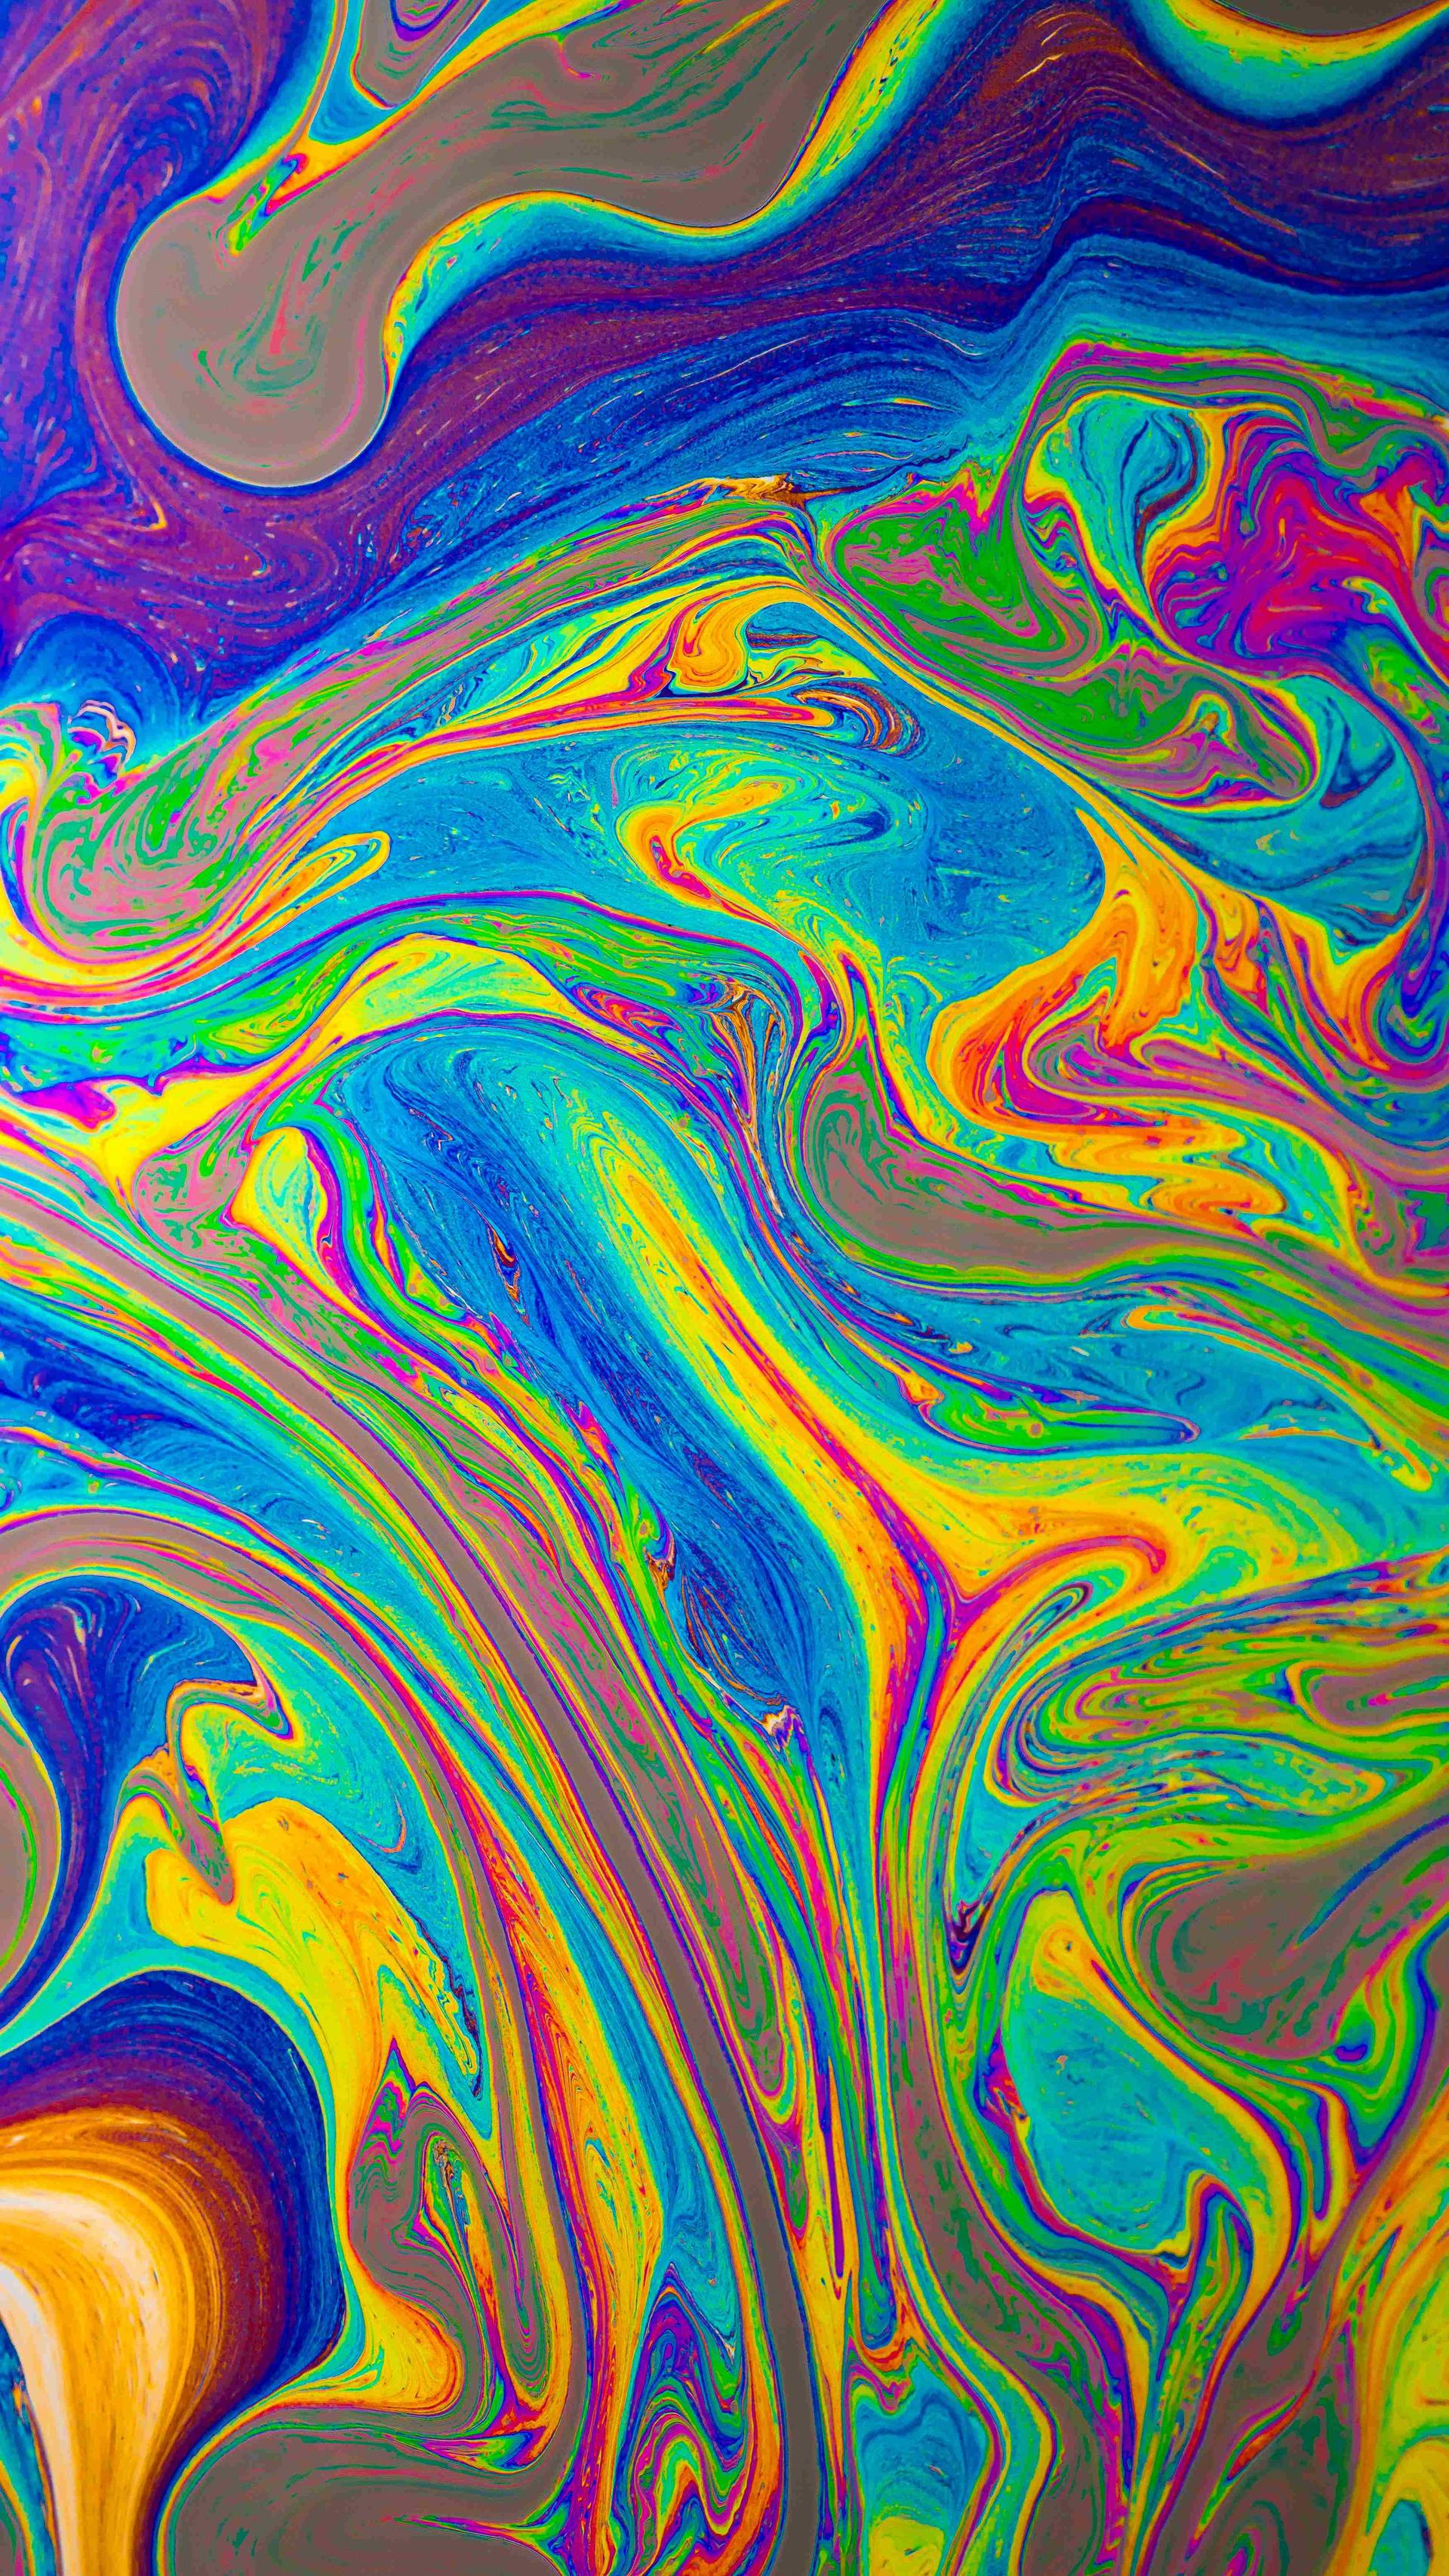 Oil on water is creating a colorful picture.